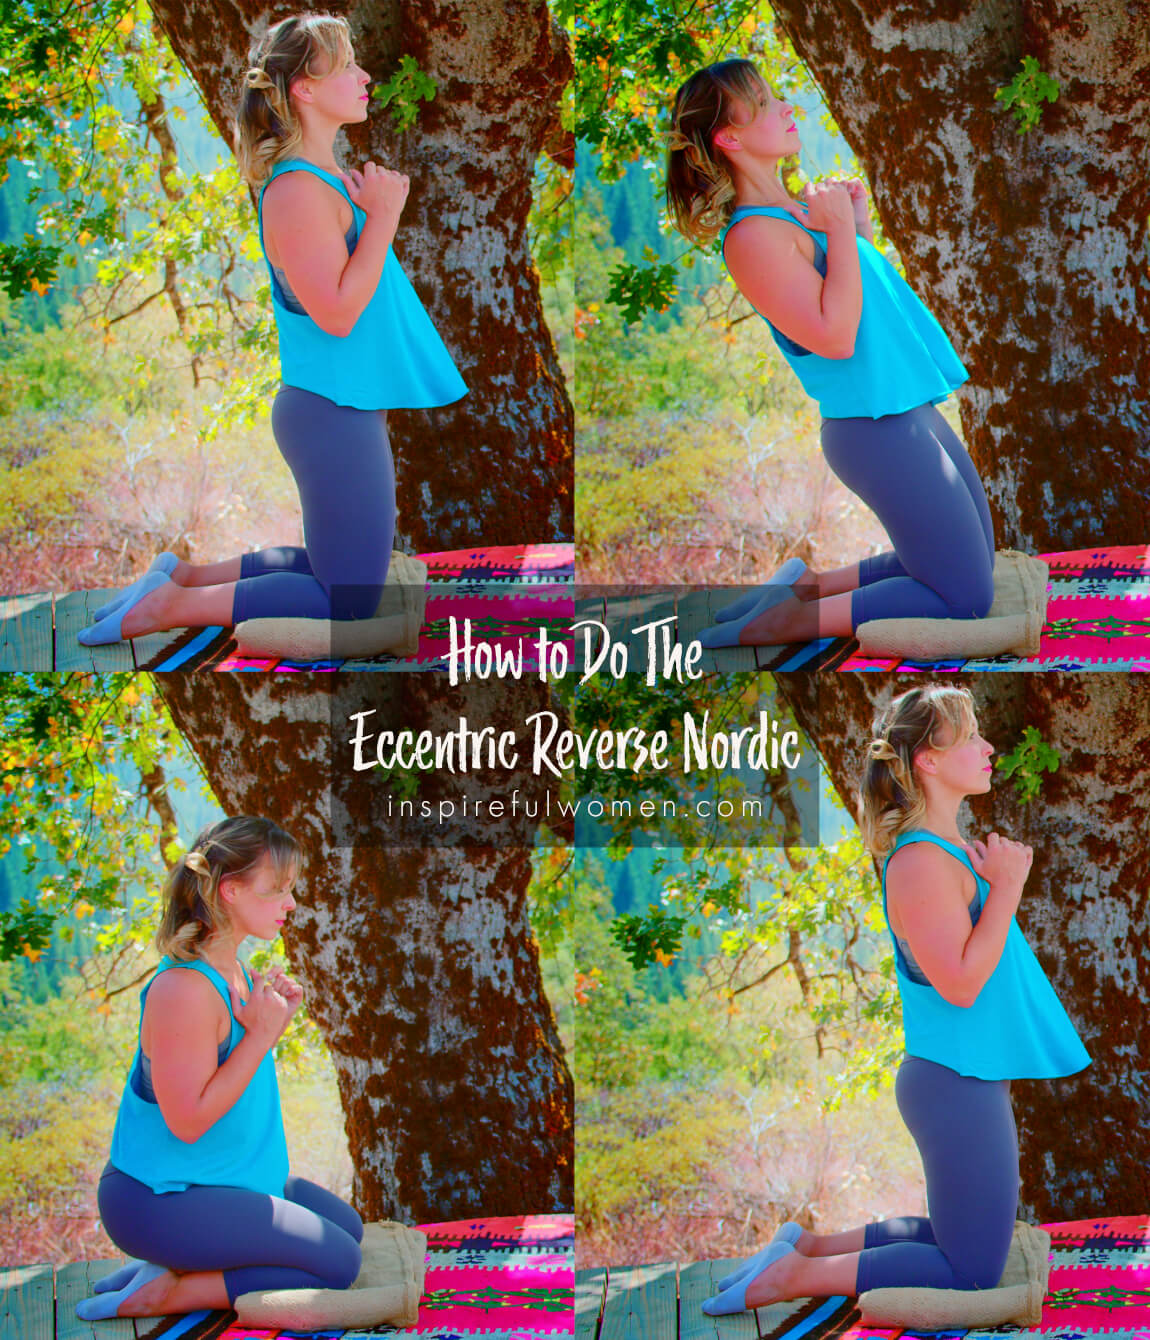 how-to-eccentric-reverse-nordic-quadriceps-exercise-neutral-hip-thigh-exercise-proper-form